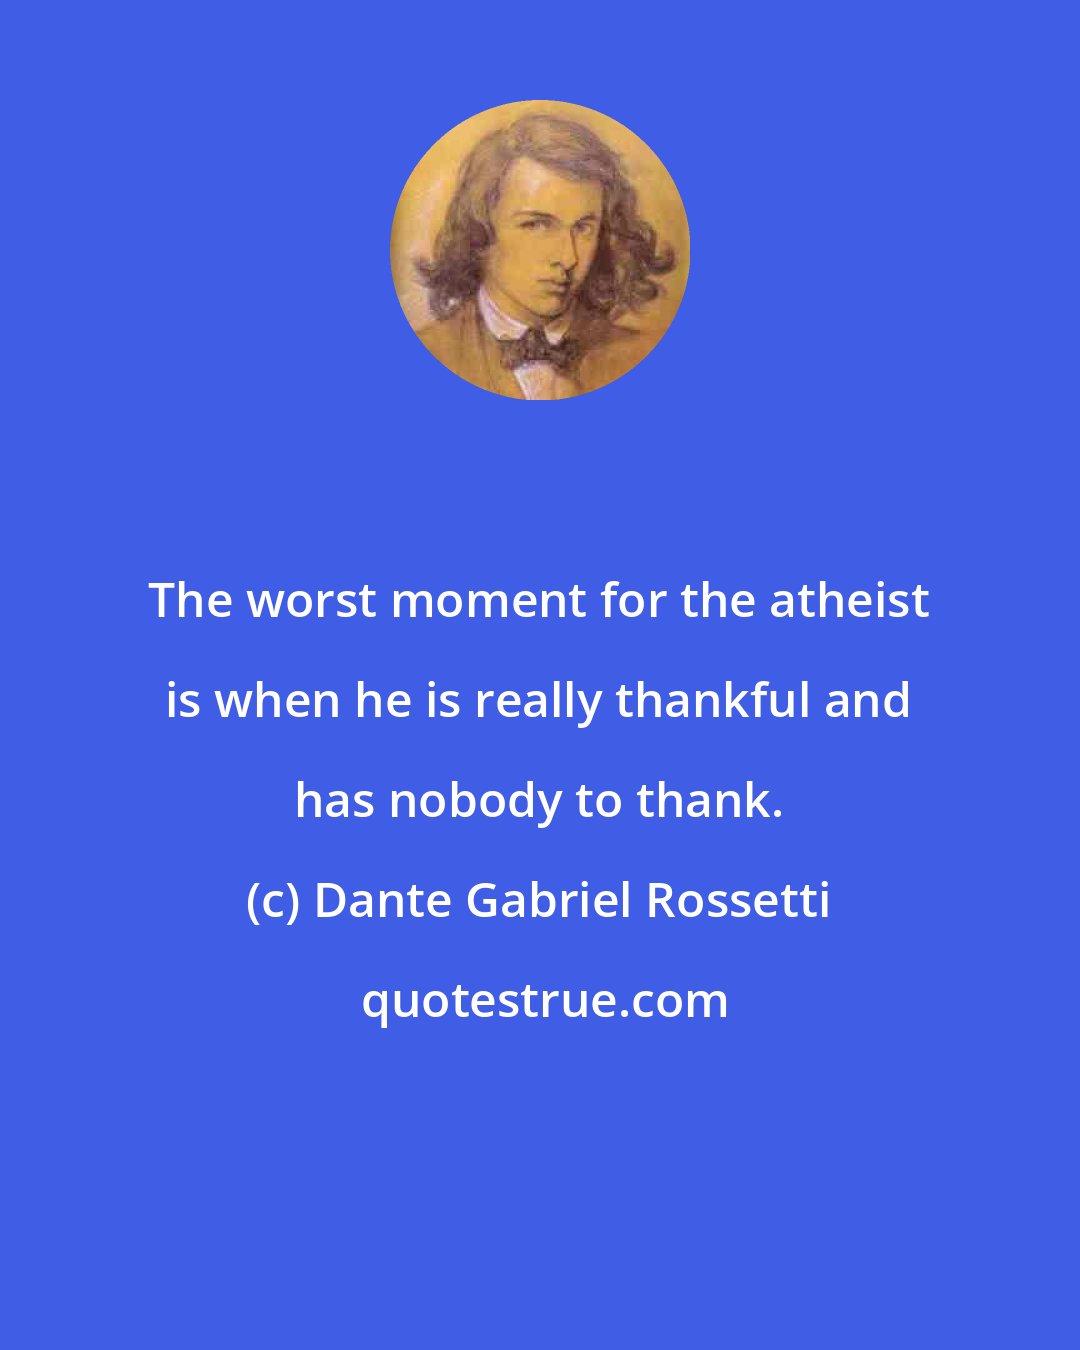 Dante Gabriel Rossetti: The worst moment for the atheist is when he is really thankful and has nobody to thank.